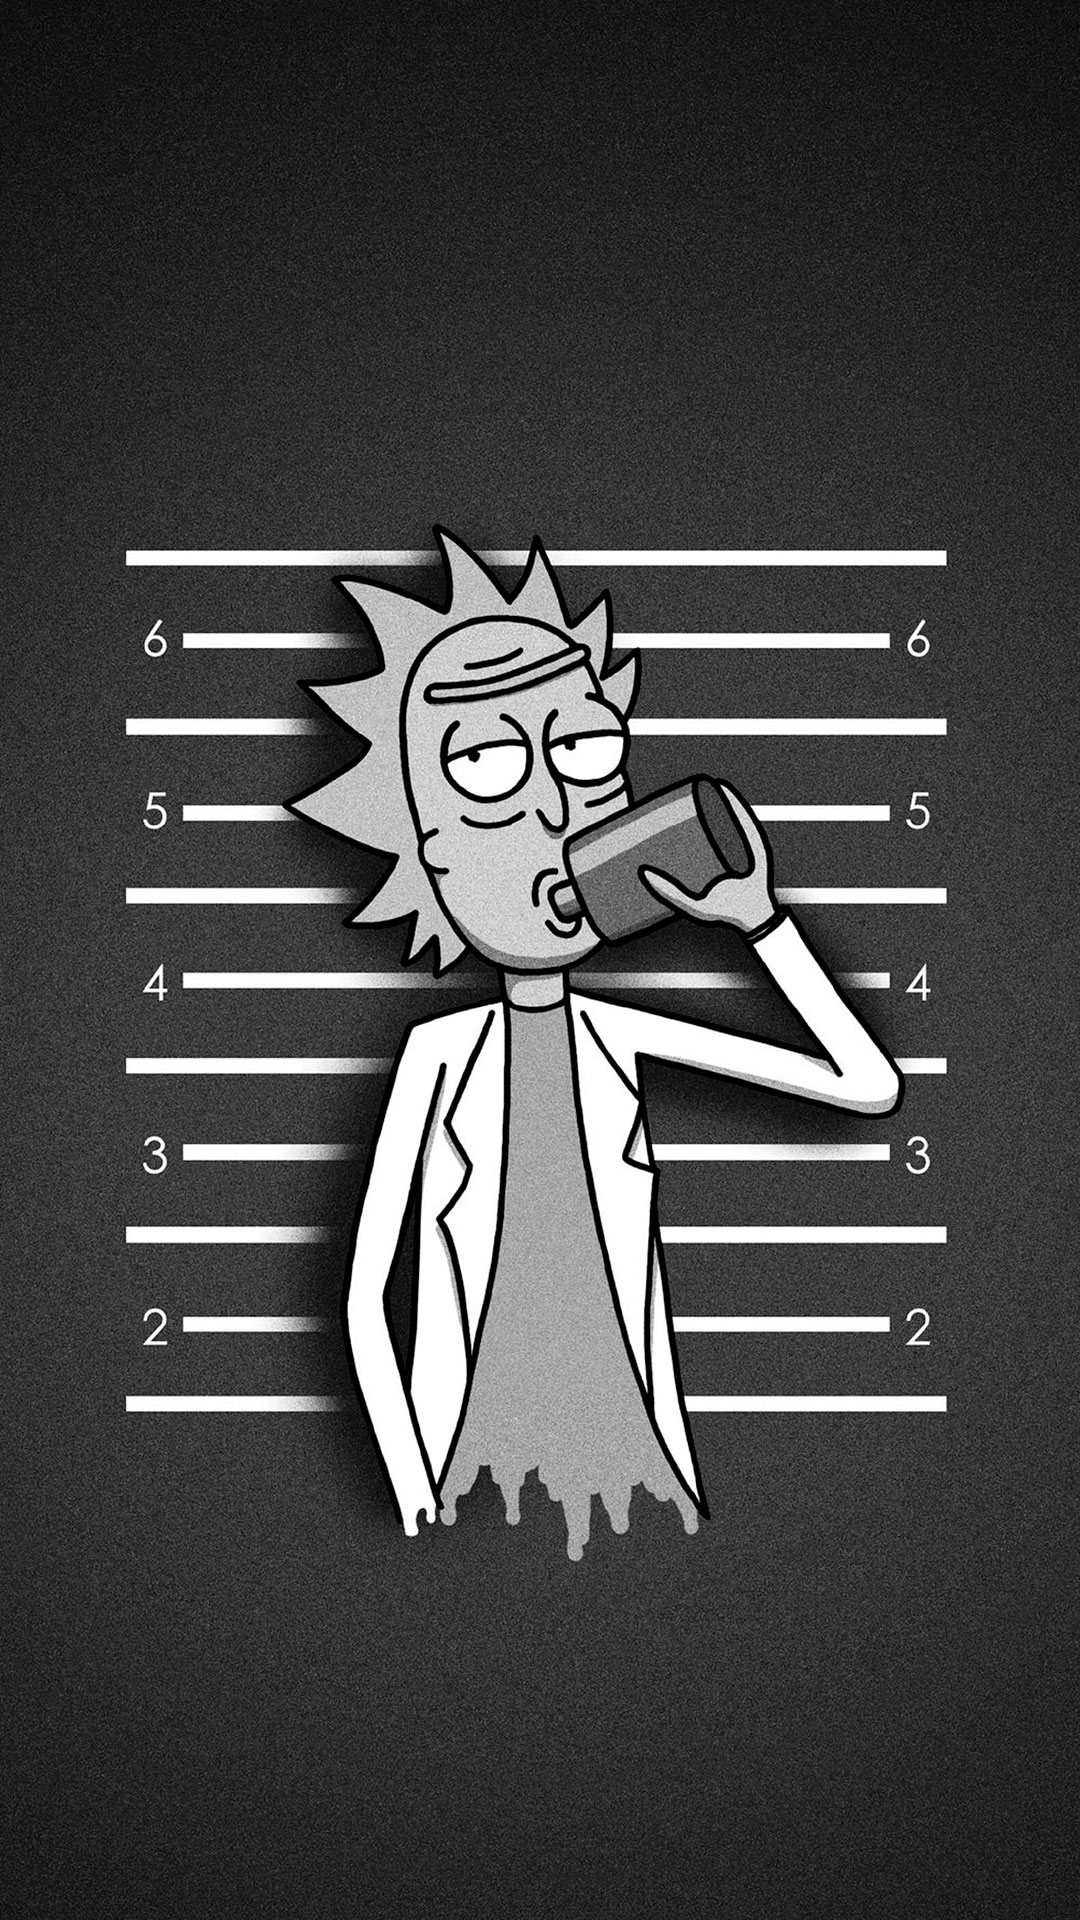 Rick and Morty Wallpaper for iPhone Pro Max, X, 6